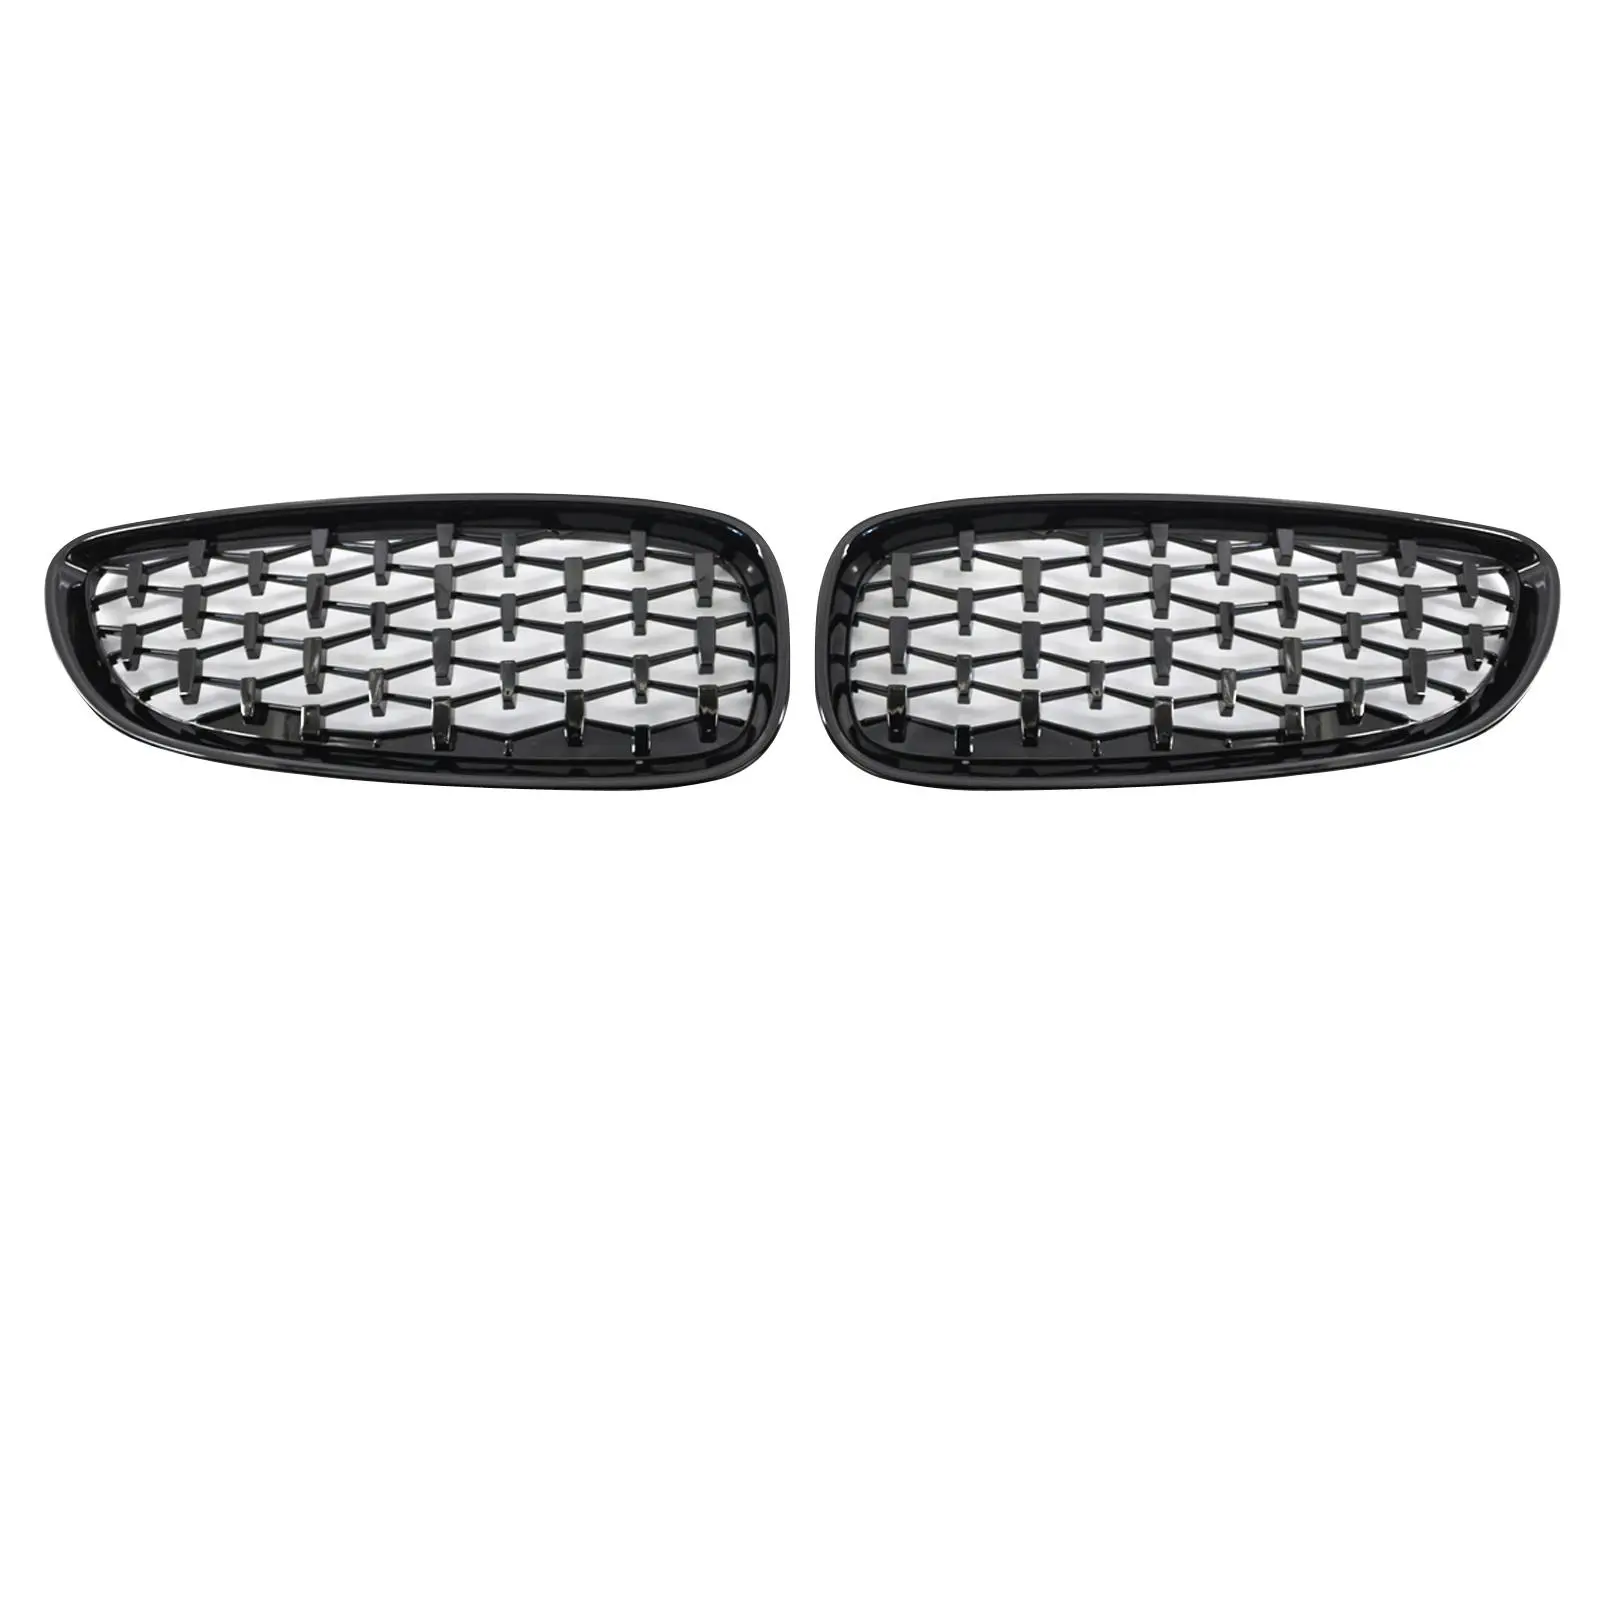 2x 51137181547 Air Inlet cover Front Kidney Grille for Z4 E89 Automobile